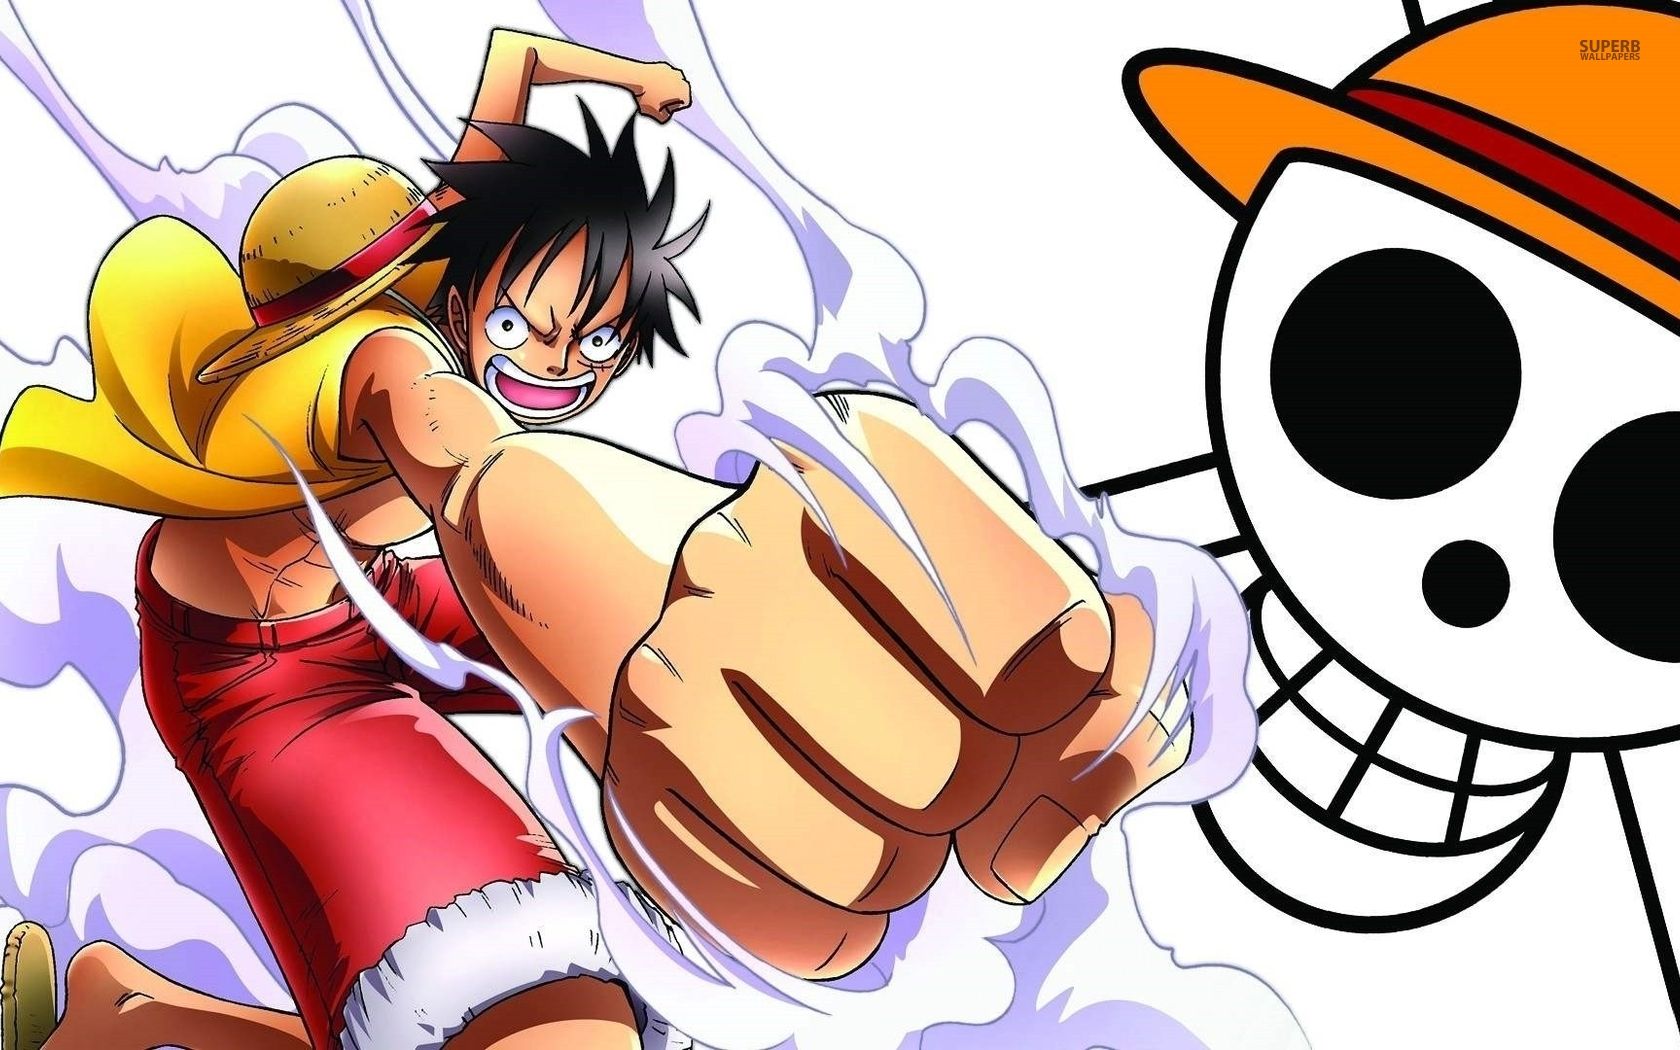 Monkey D. Luffy - One Piece wallpaper - Anime wallpapers -